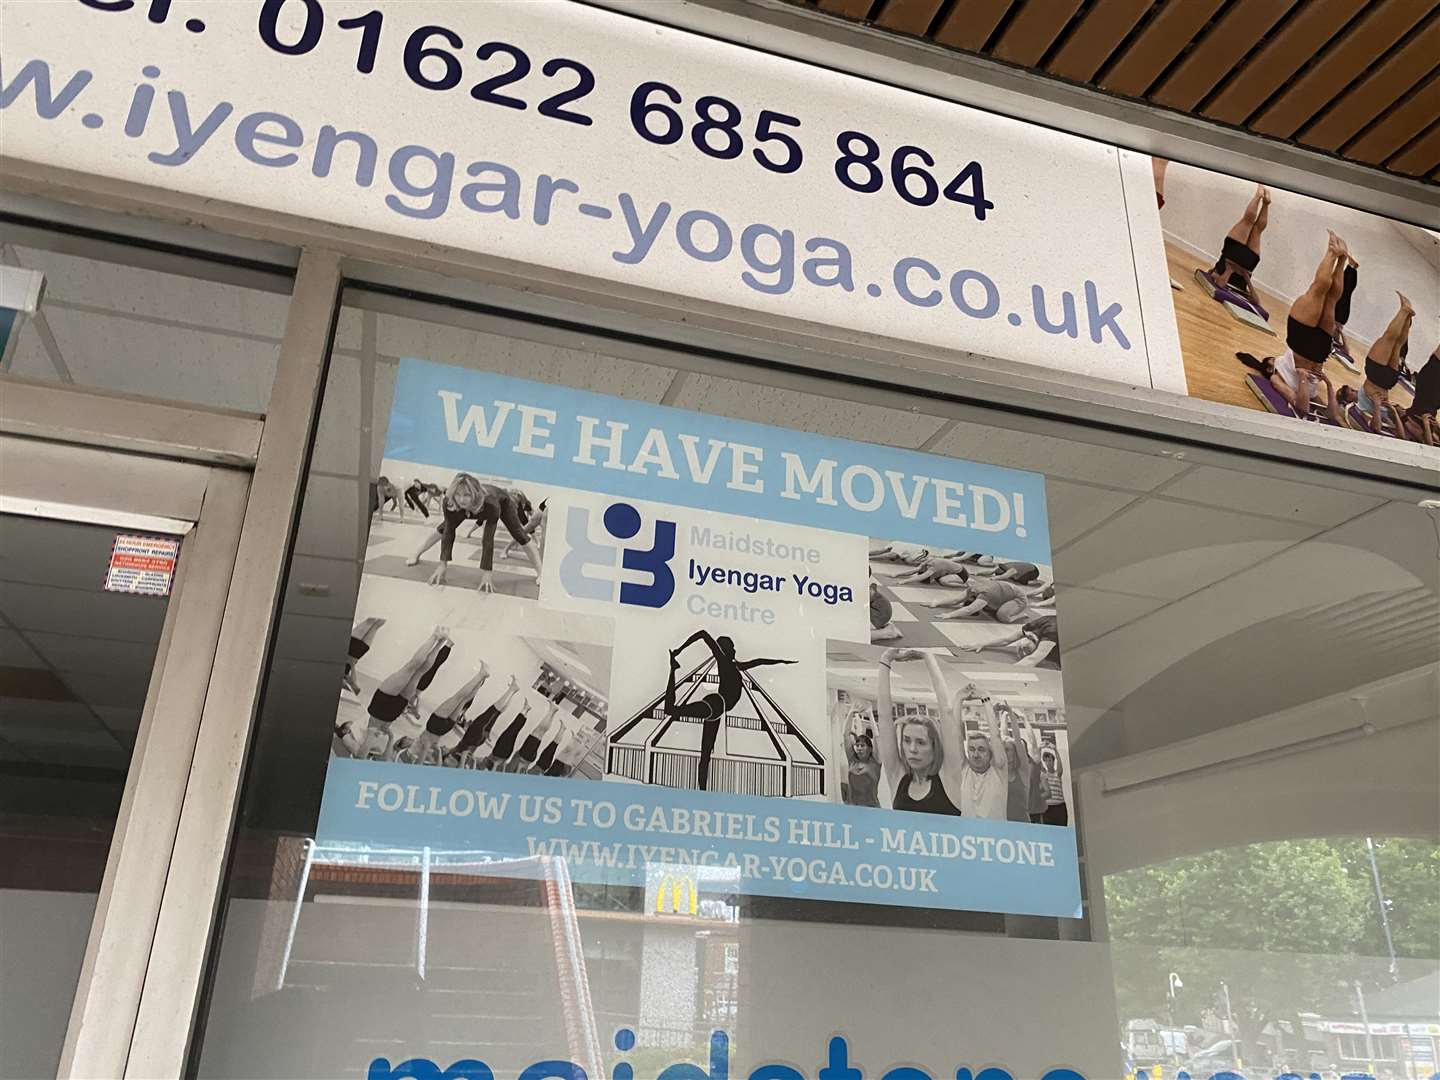 The Maidstone Yoga Centre had closed and moved to Gabriel's Hill